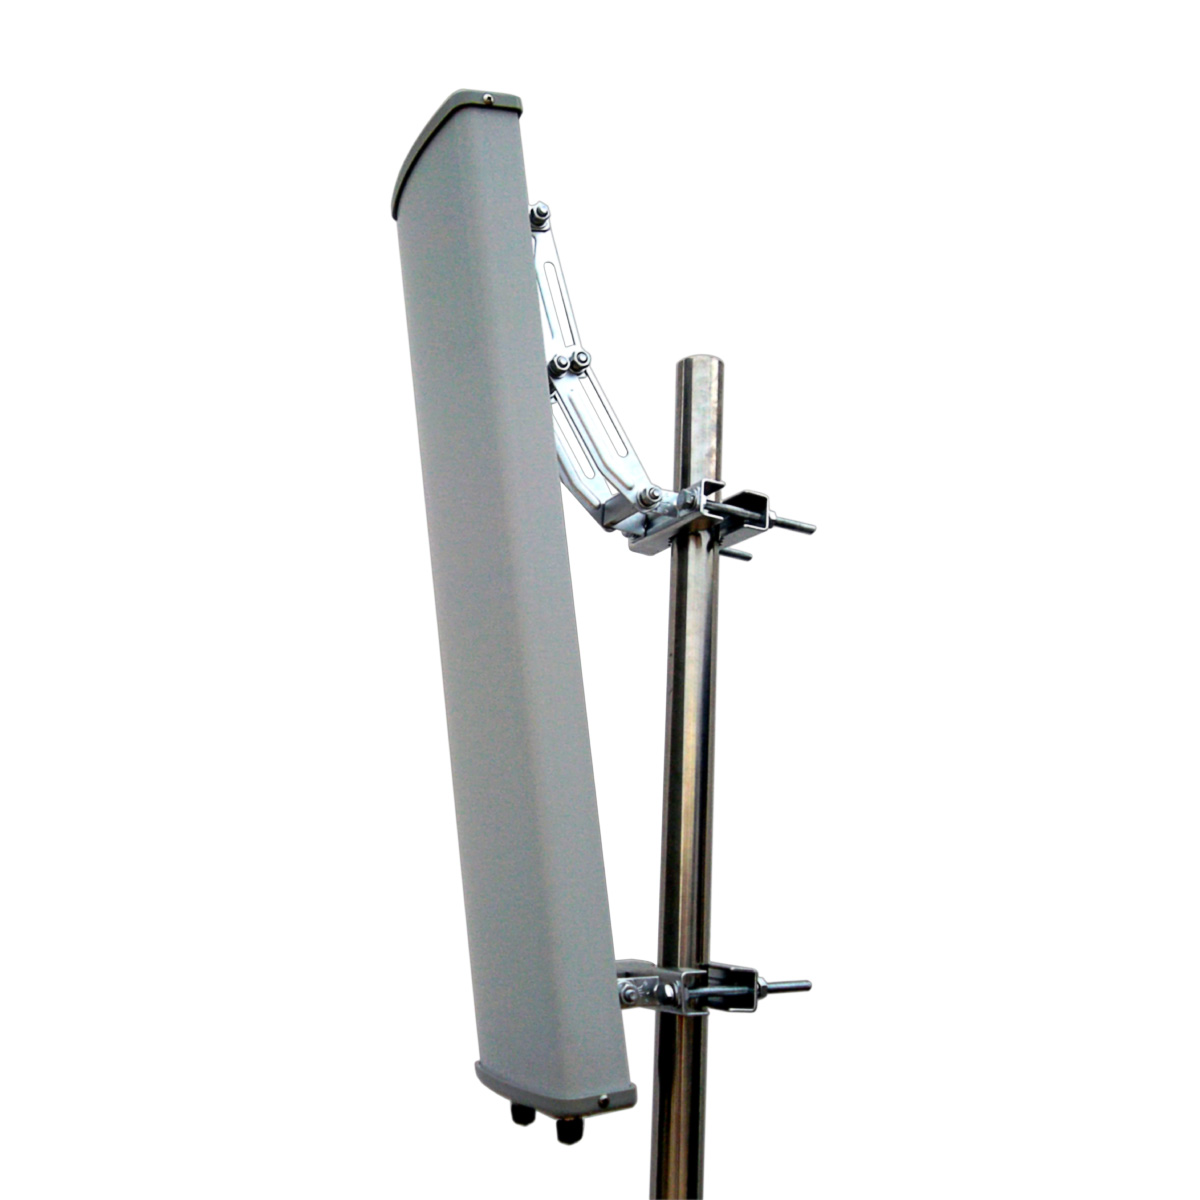 New products RF698-960/1710-2700MHz Panel Antenna with High Gain for DAS IBS